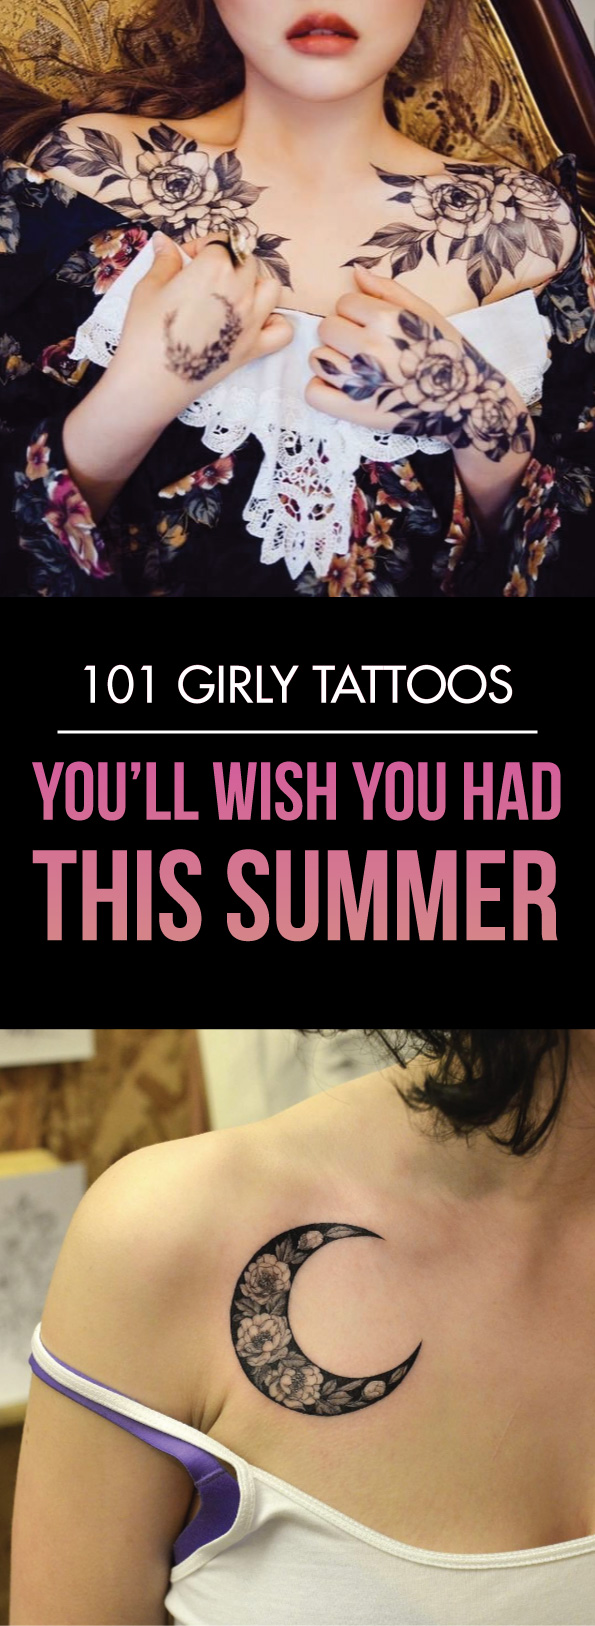 101 Girly Tattoos You'll Wish You Had This Summer